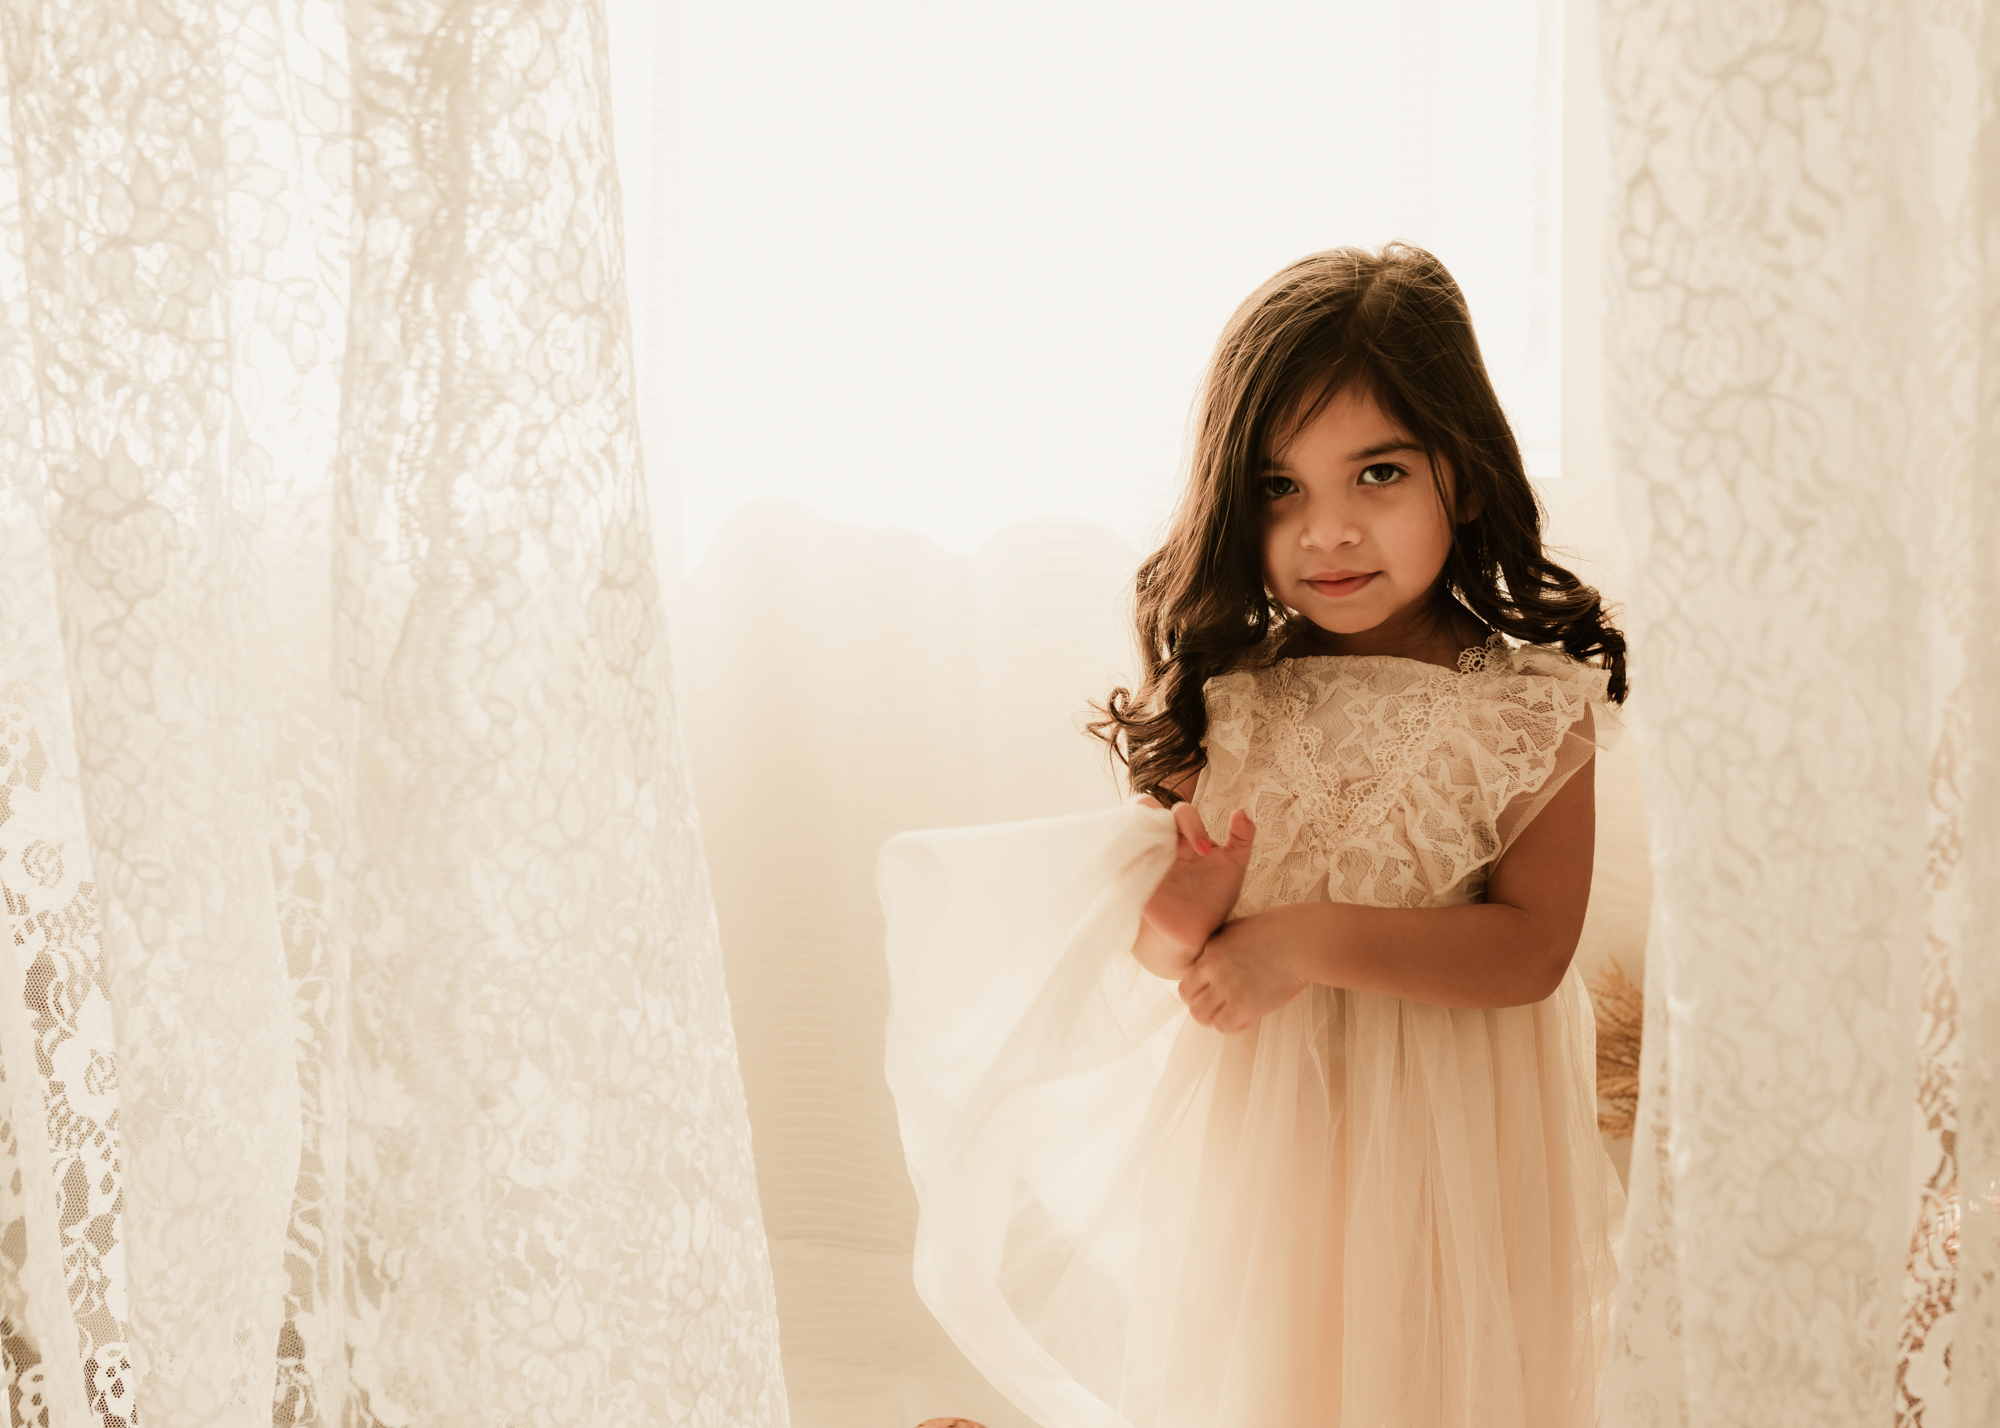 A young girl plays with her lace and tule dress amongst some window curtains pediatrician OKC